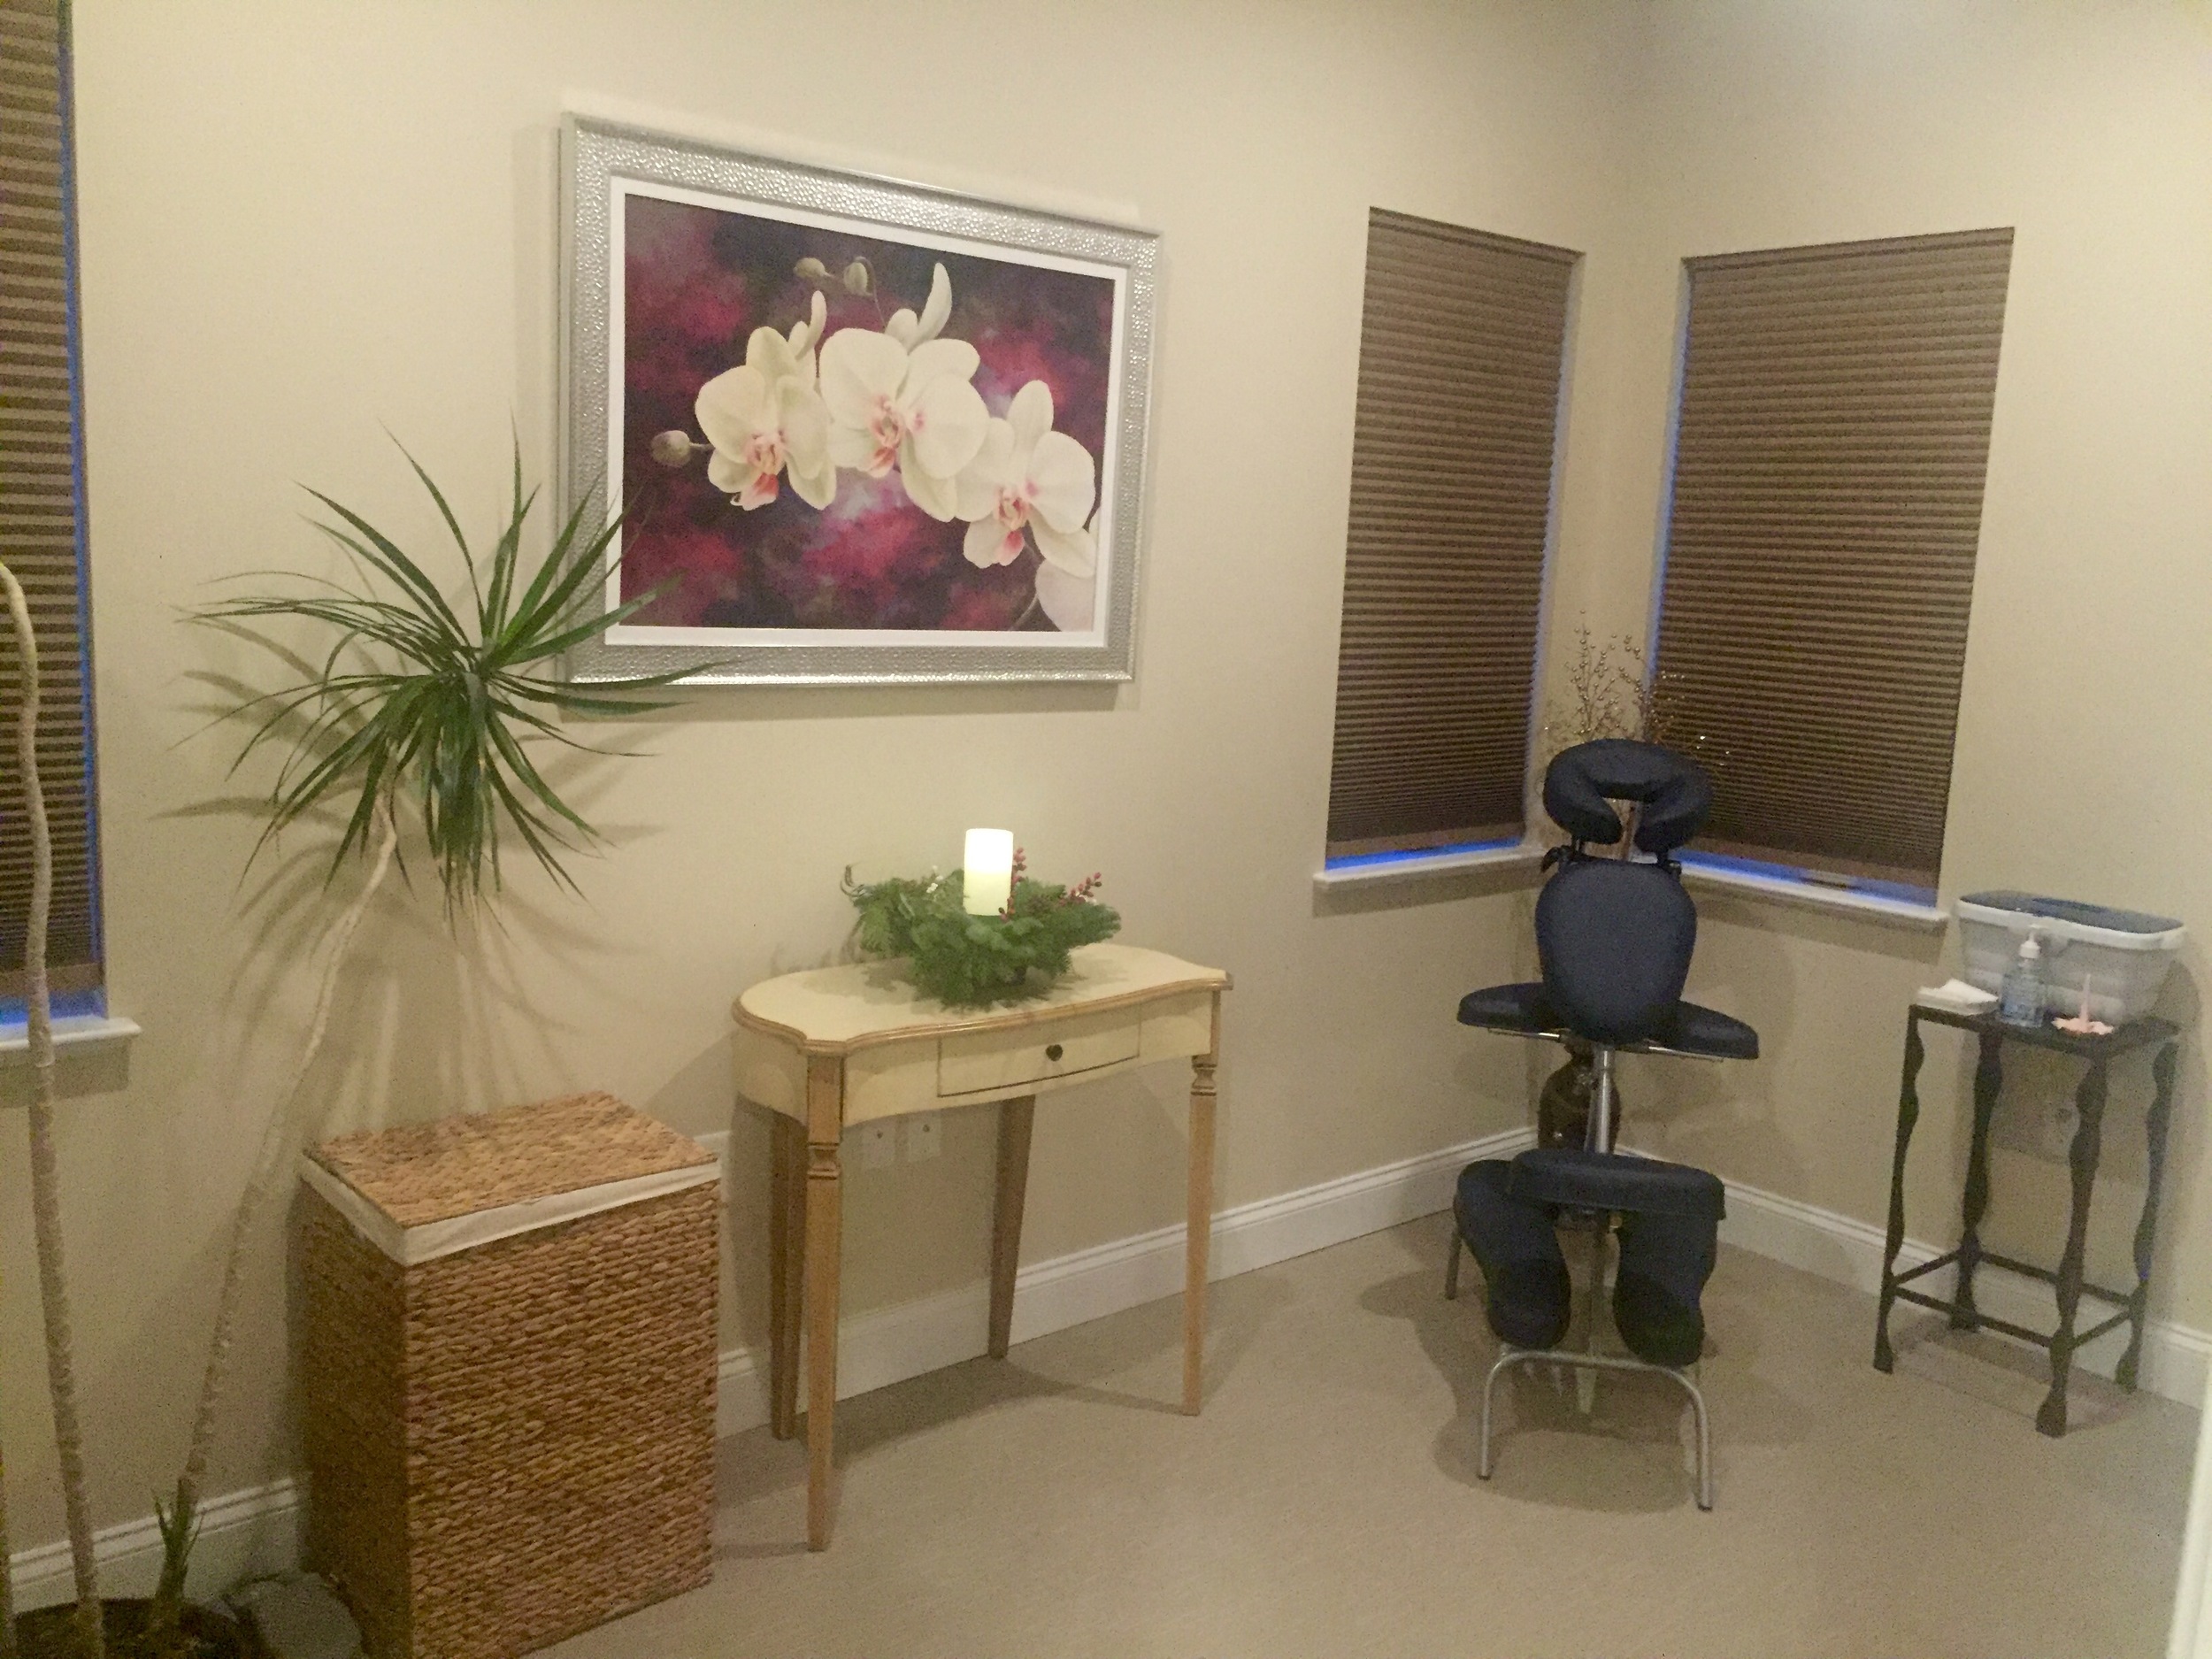 Massage Therapy Room #1